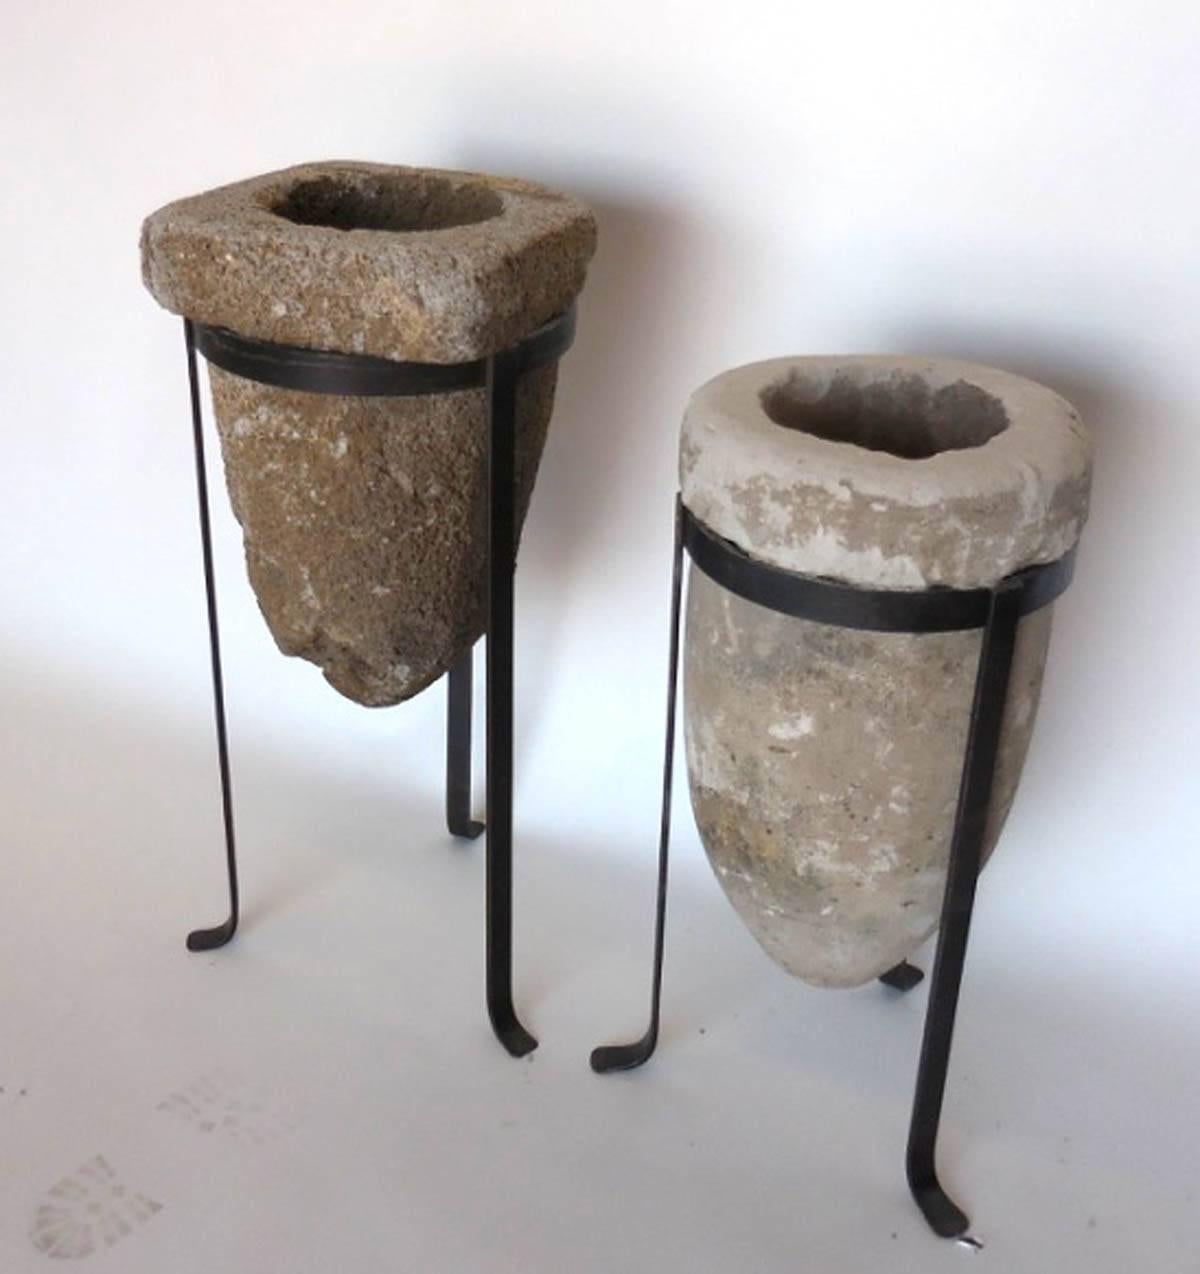 volcanic stone water filter